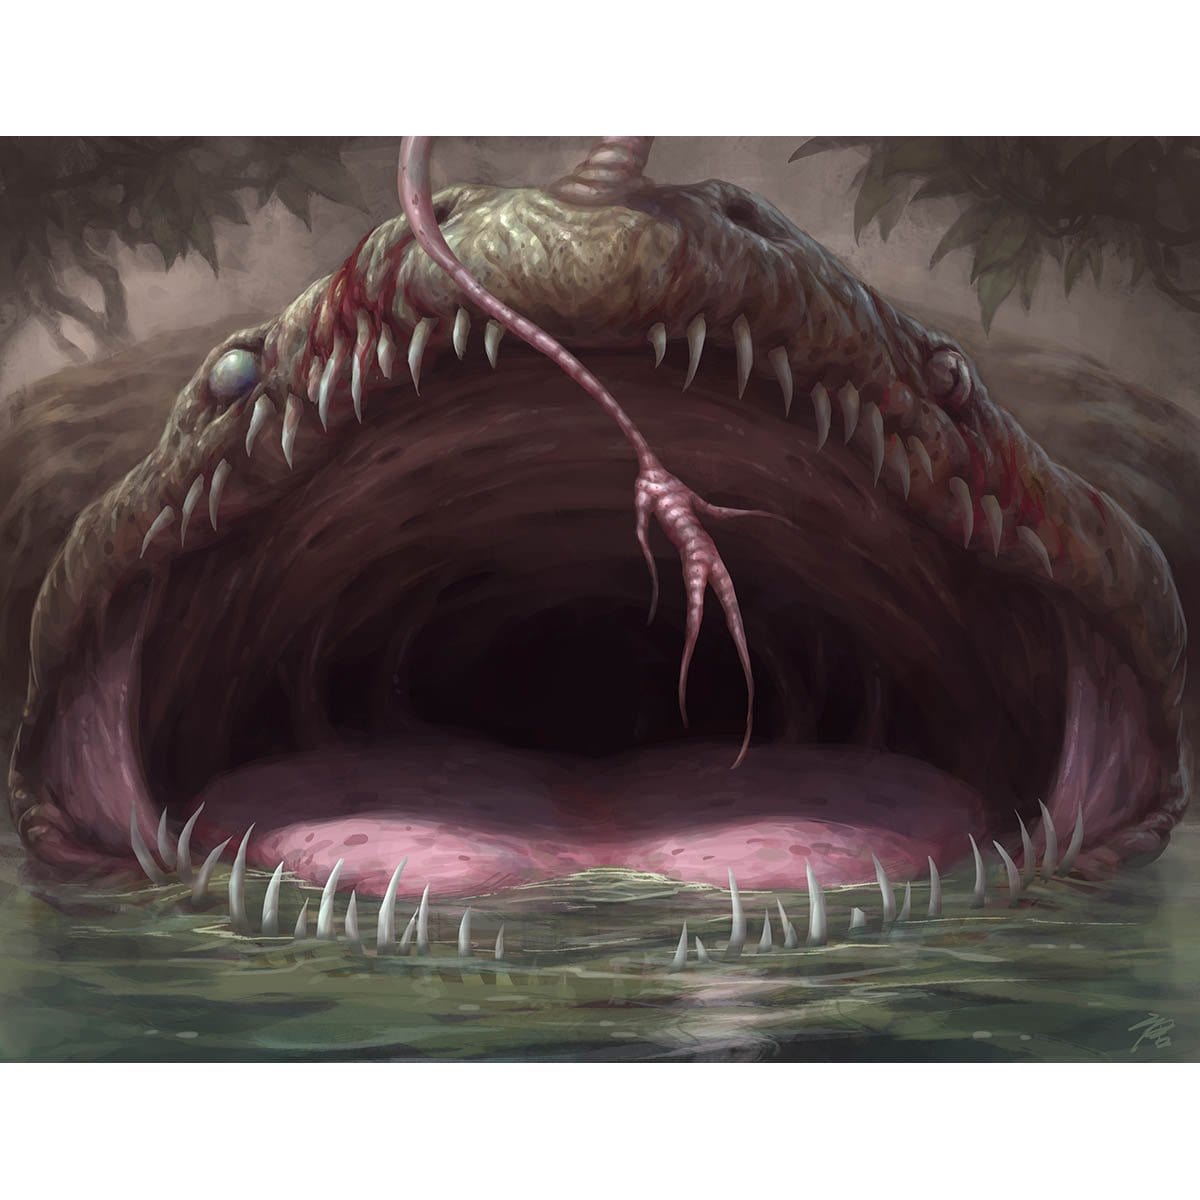 Gurmag Angler Print - Print - Original Magic Art - Accessories for Magic the Gathering and other card games